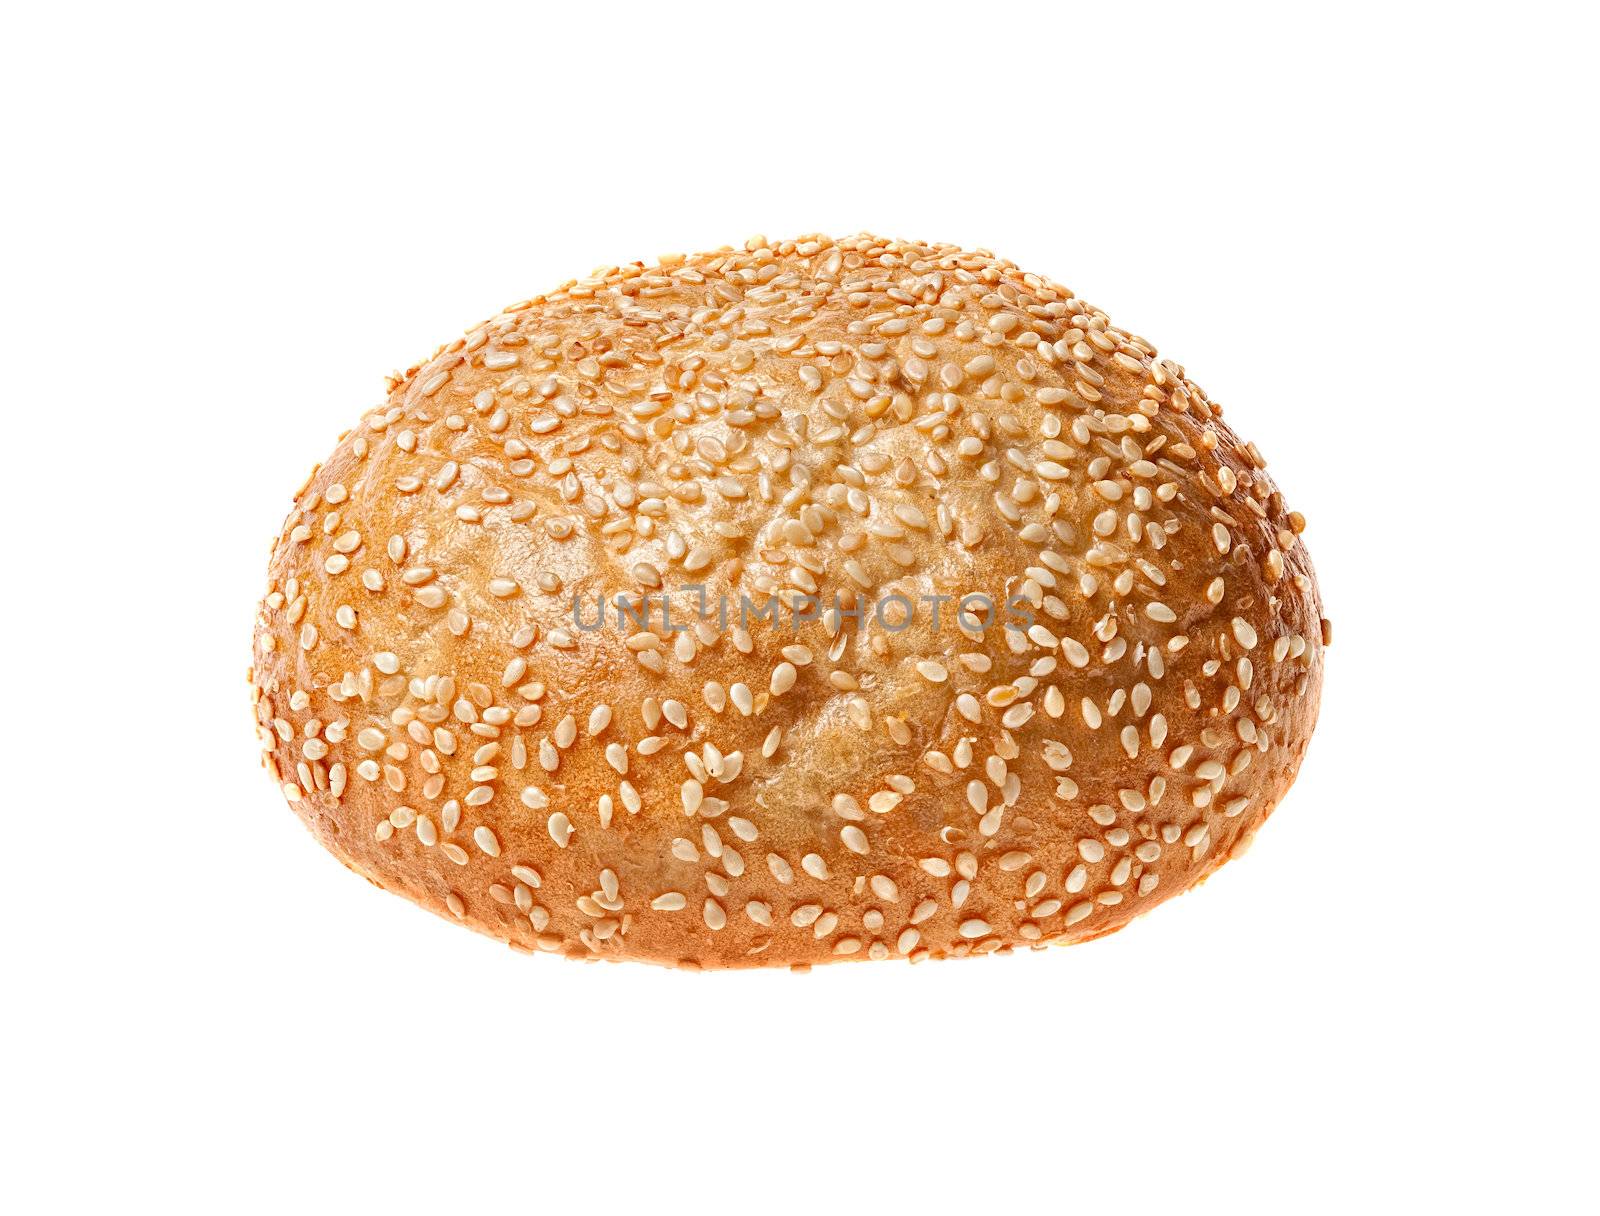 Bun with sesame seeds on a white background